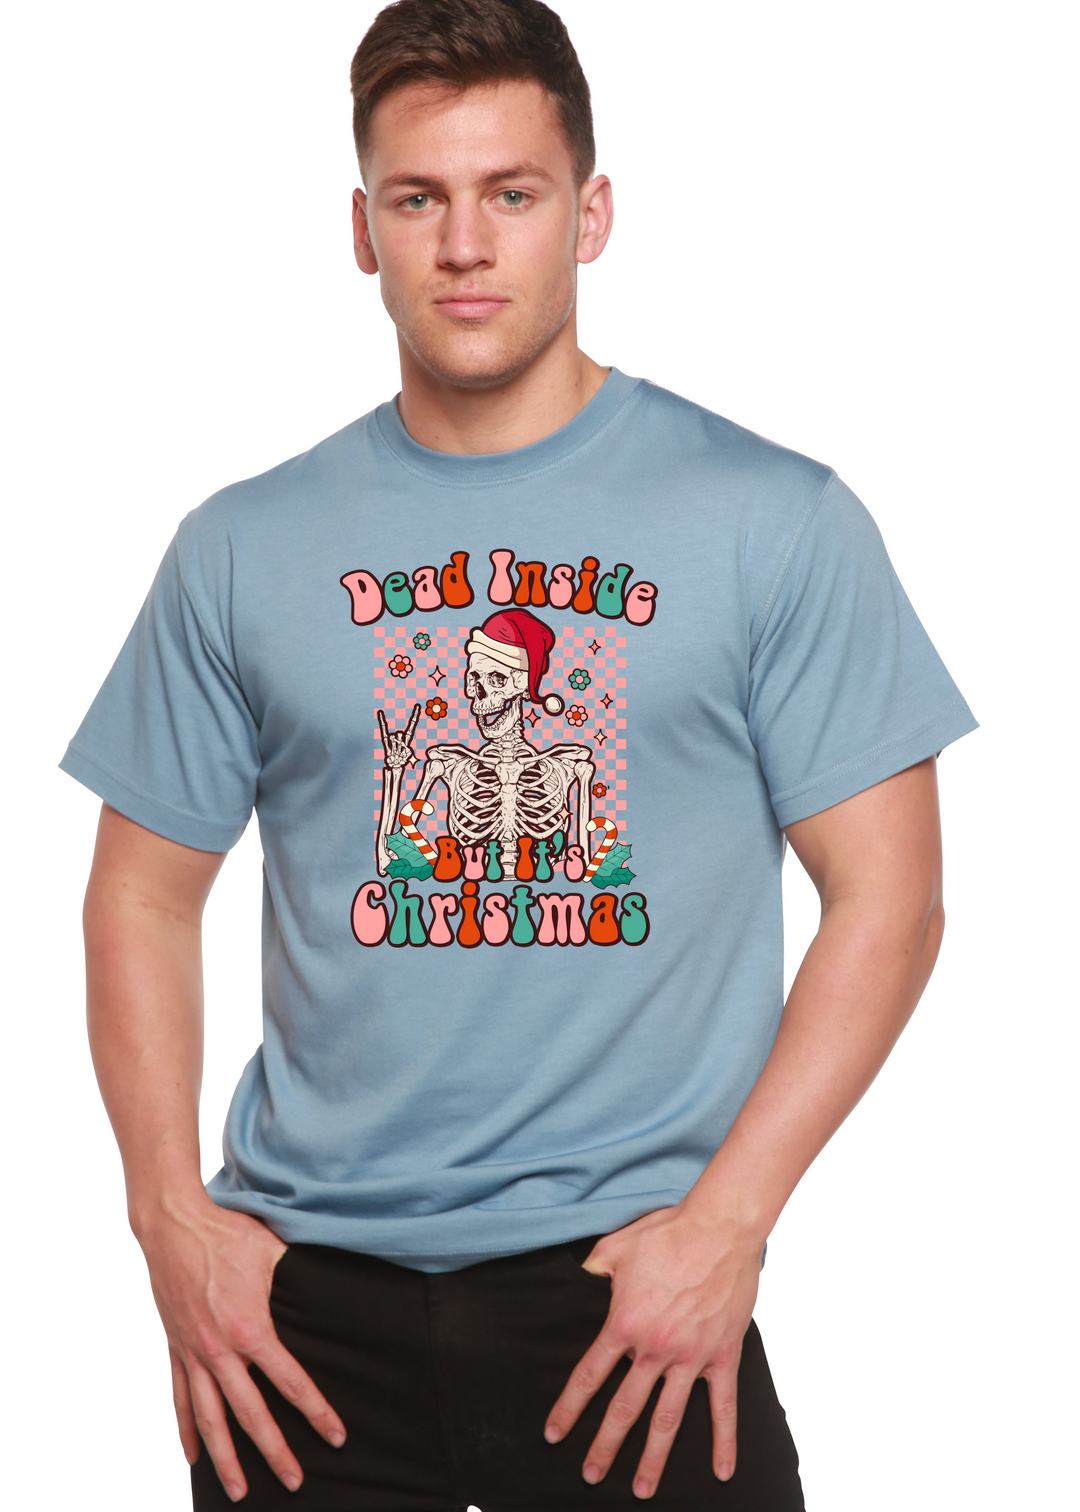 Dead Inside But It's Christmas Unisex Graphic Bamboo T-Shirt infinity blue